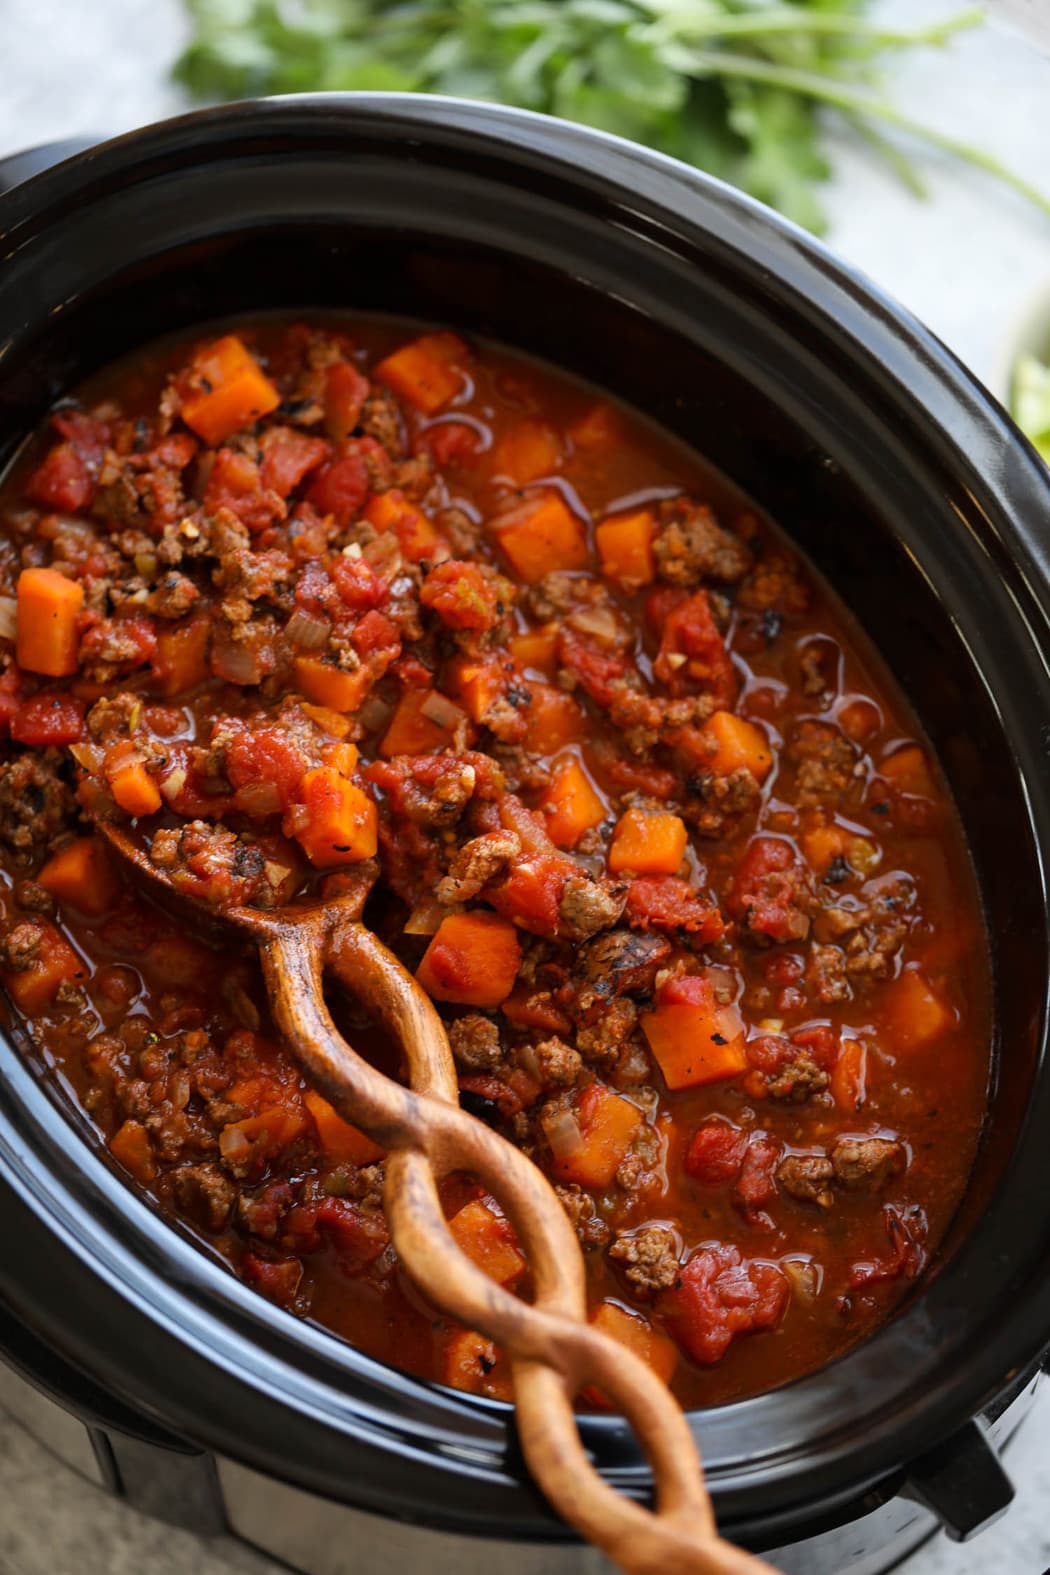 Nourish Your Body with 13 Clean Eating Slow Cooker Recipes